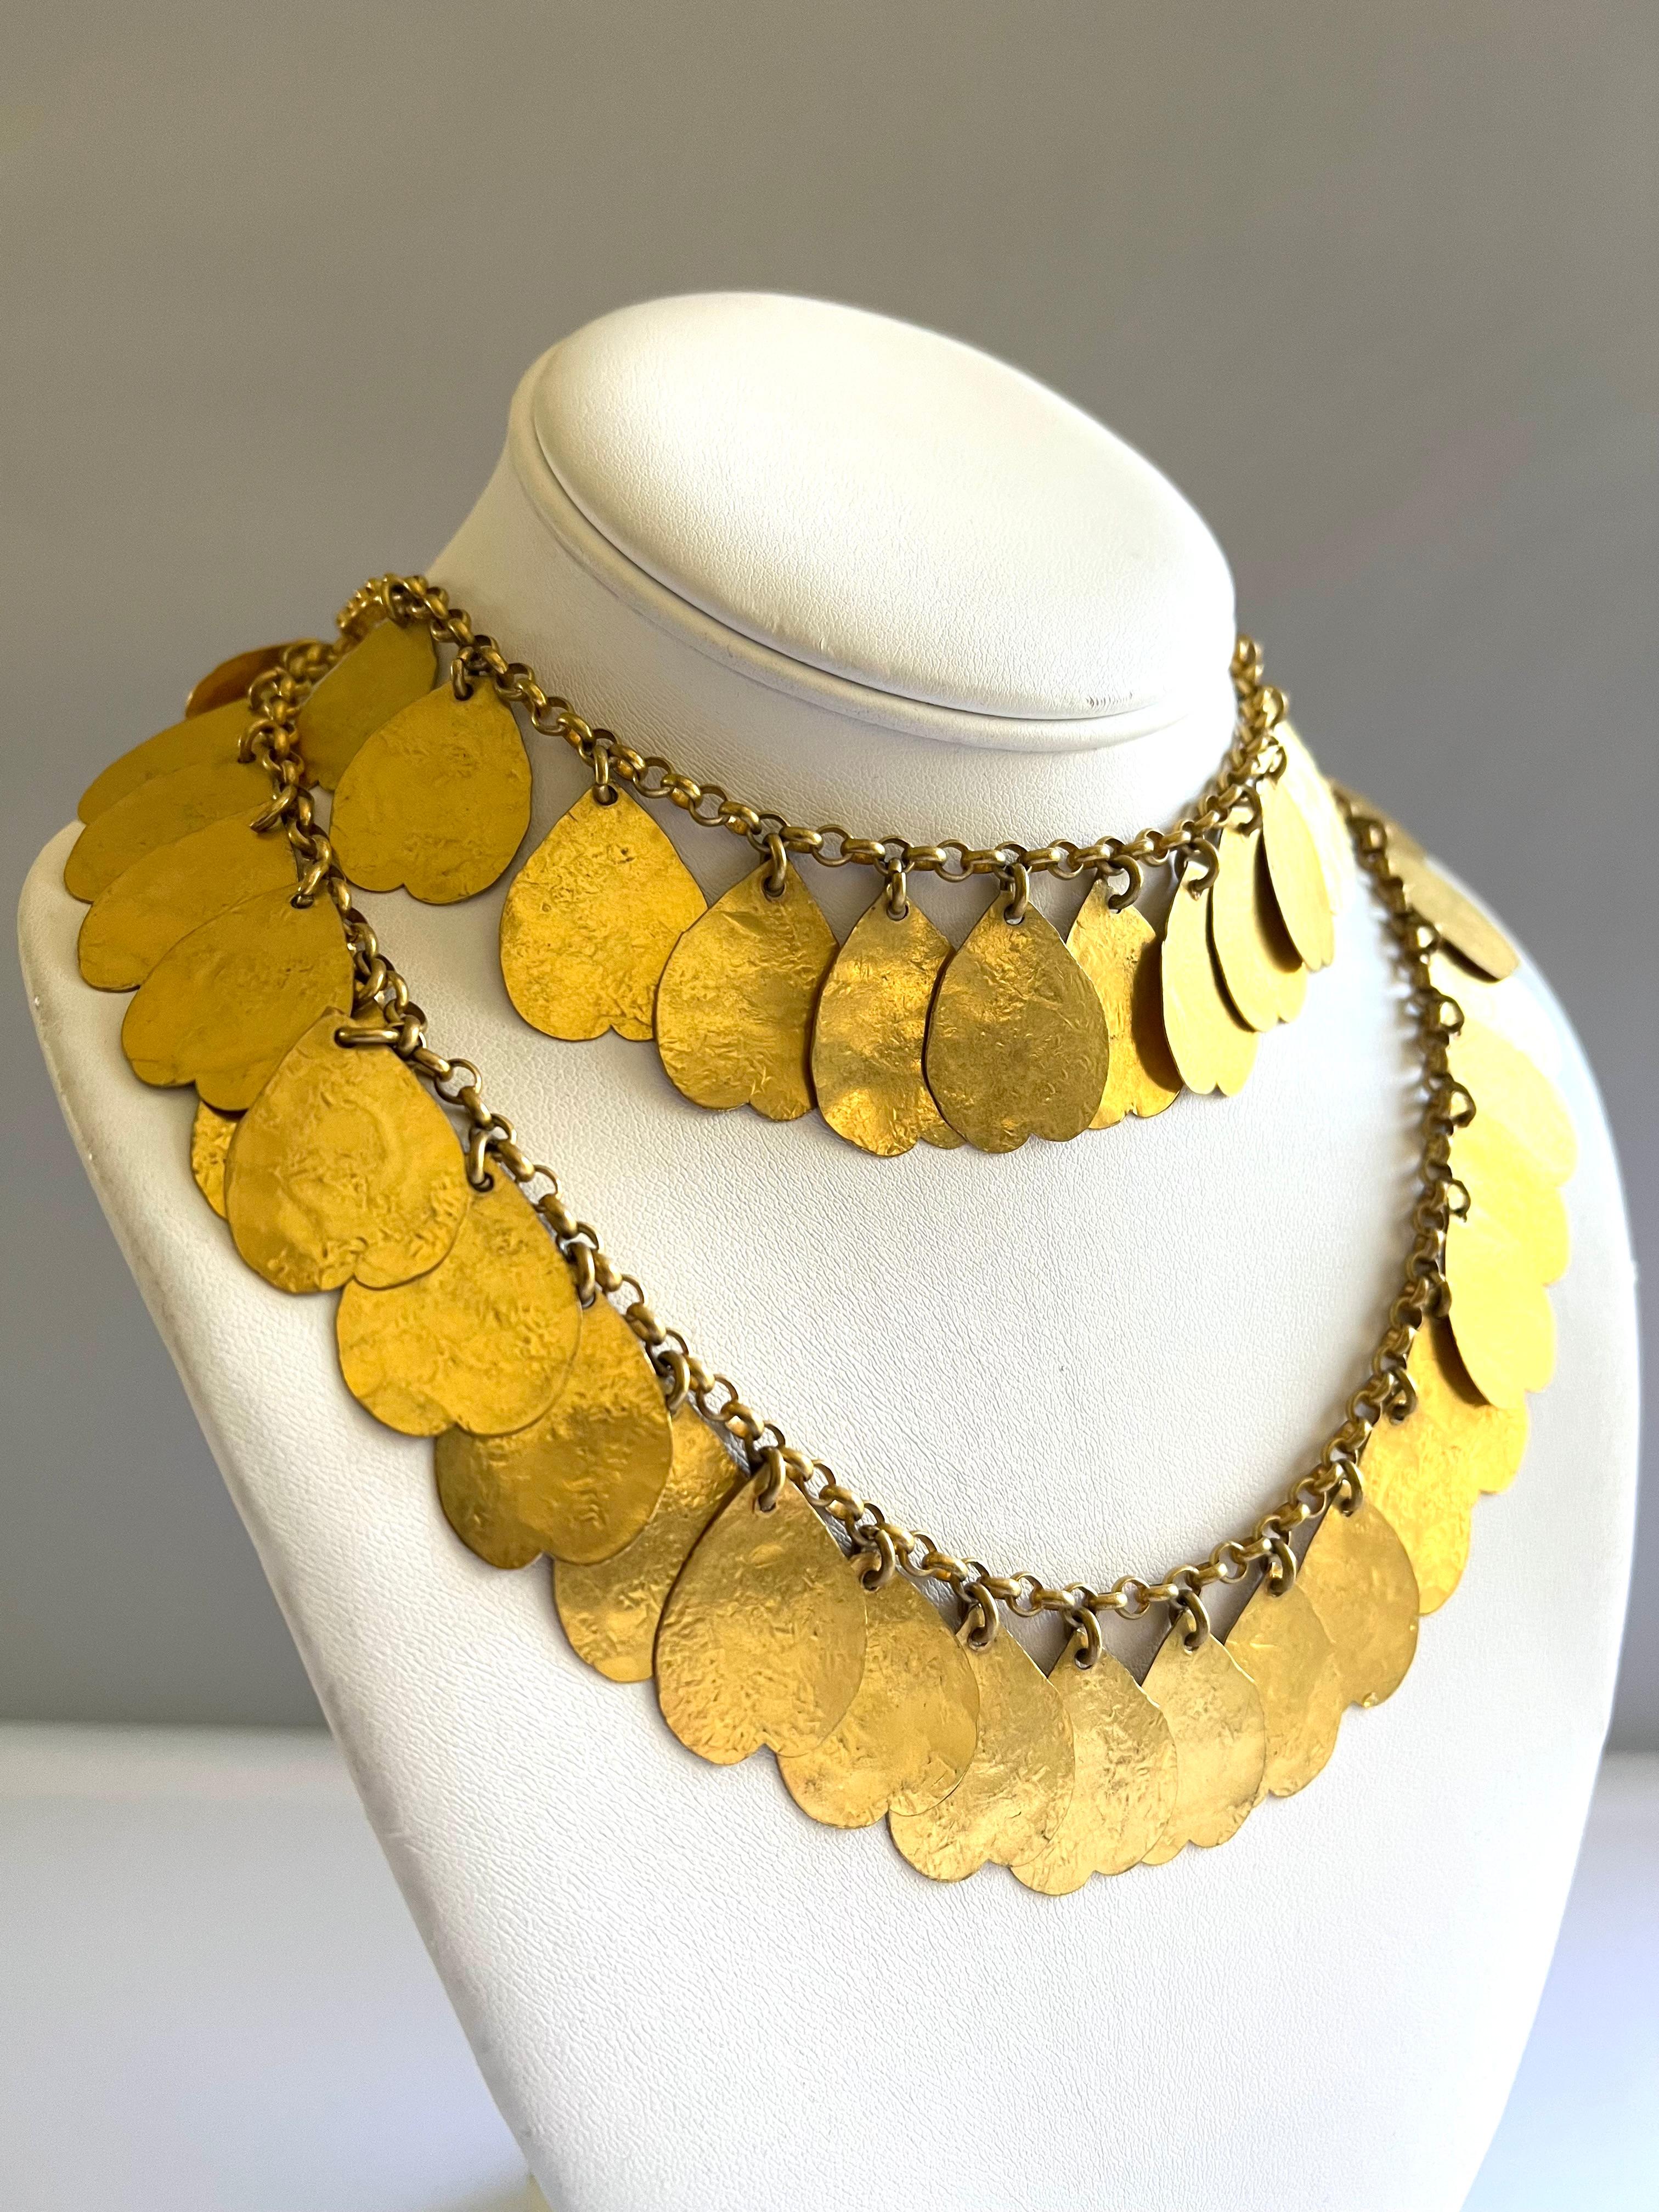 Vintage artisan hammered gilt metal chain charm necklace, by French designer Lola Prusac, circa 1960.

Lola Prusac was a Polish-born French fashion designer noted for her inventive and original way of dressing. She worked for Hermès in Paris between